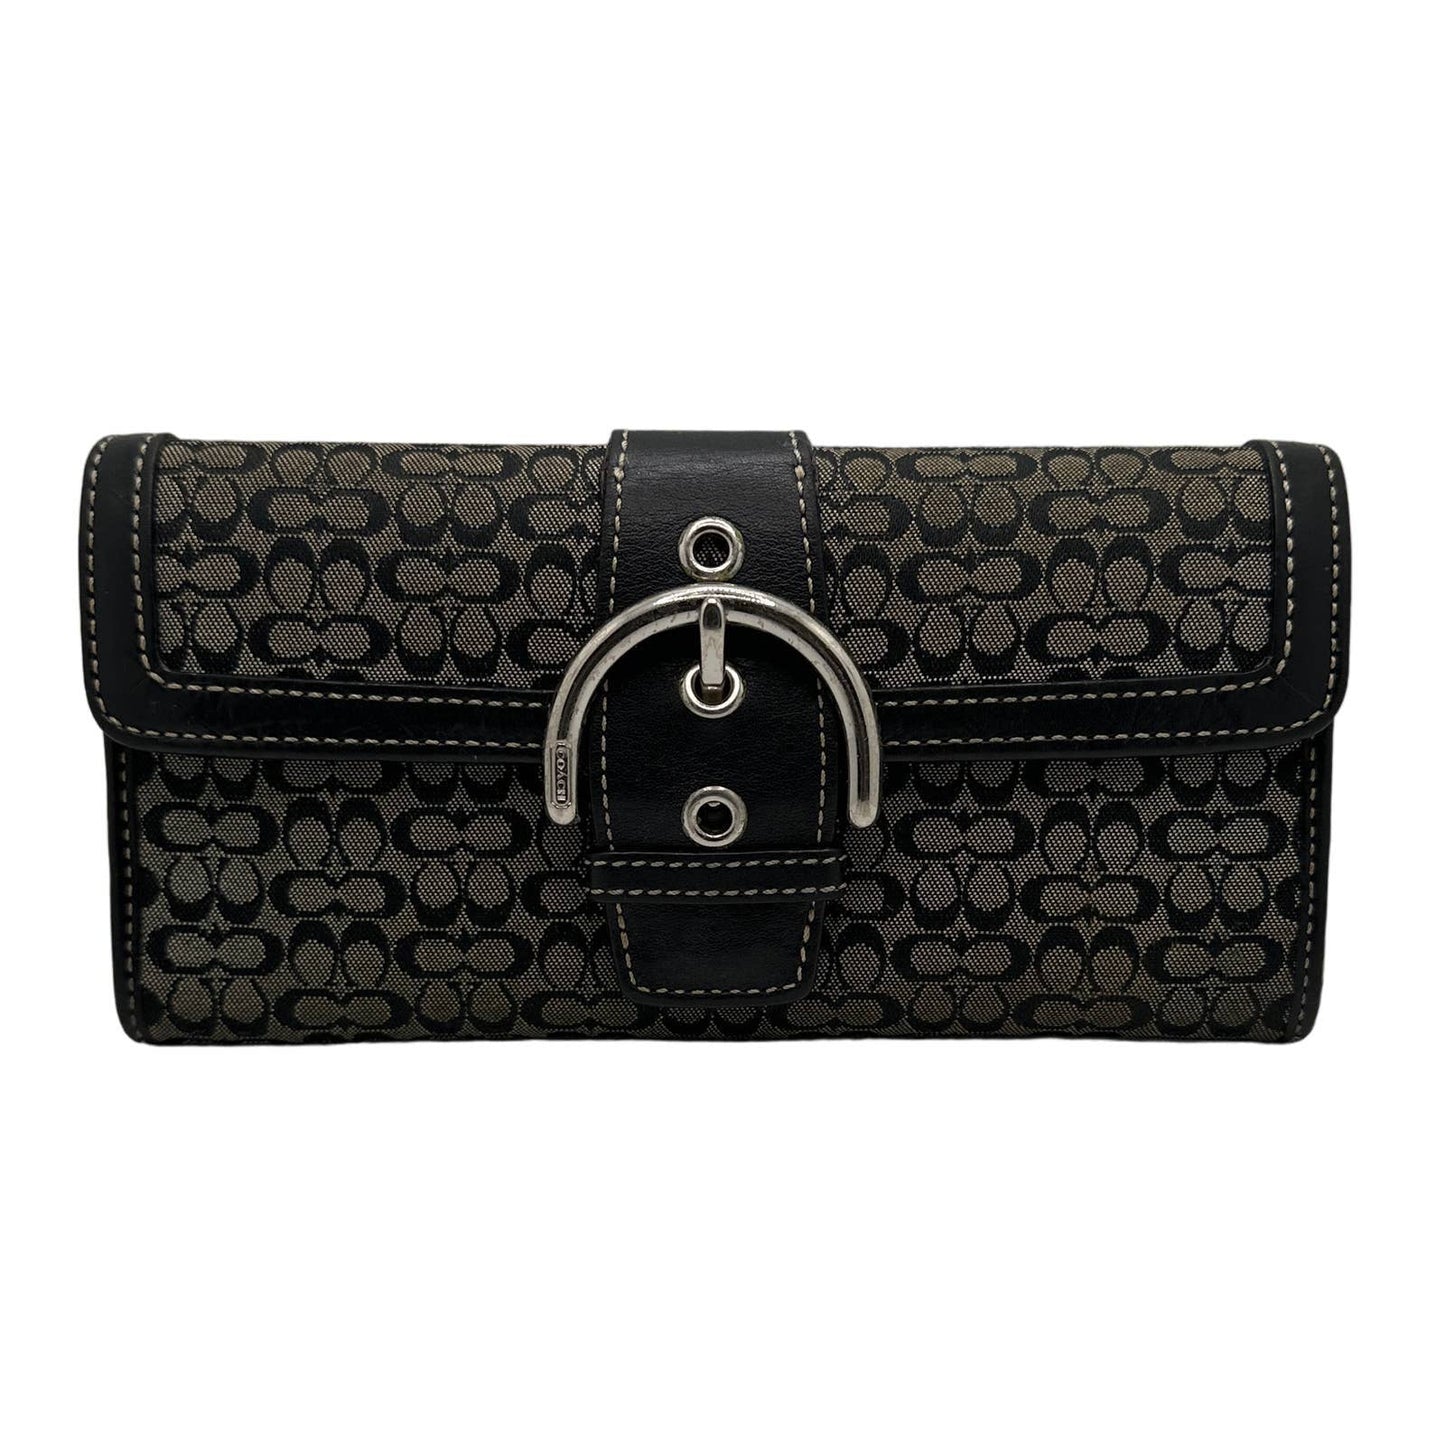 COACH Black and Gray Signature Canvas Buckle Wallet